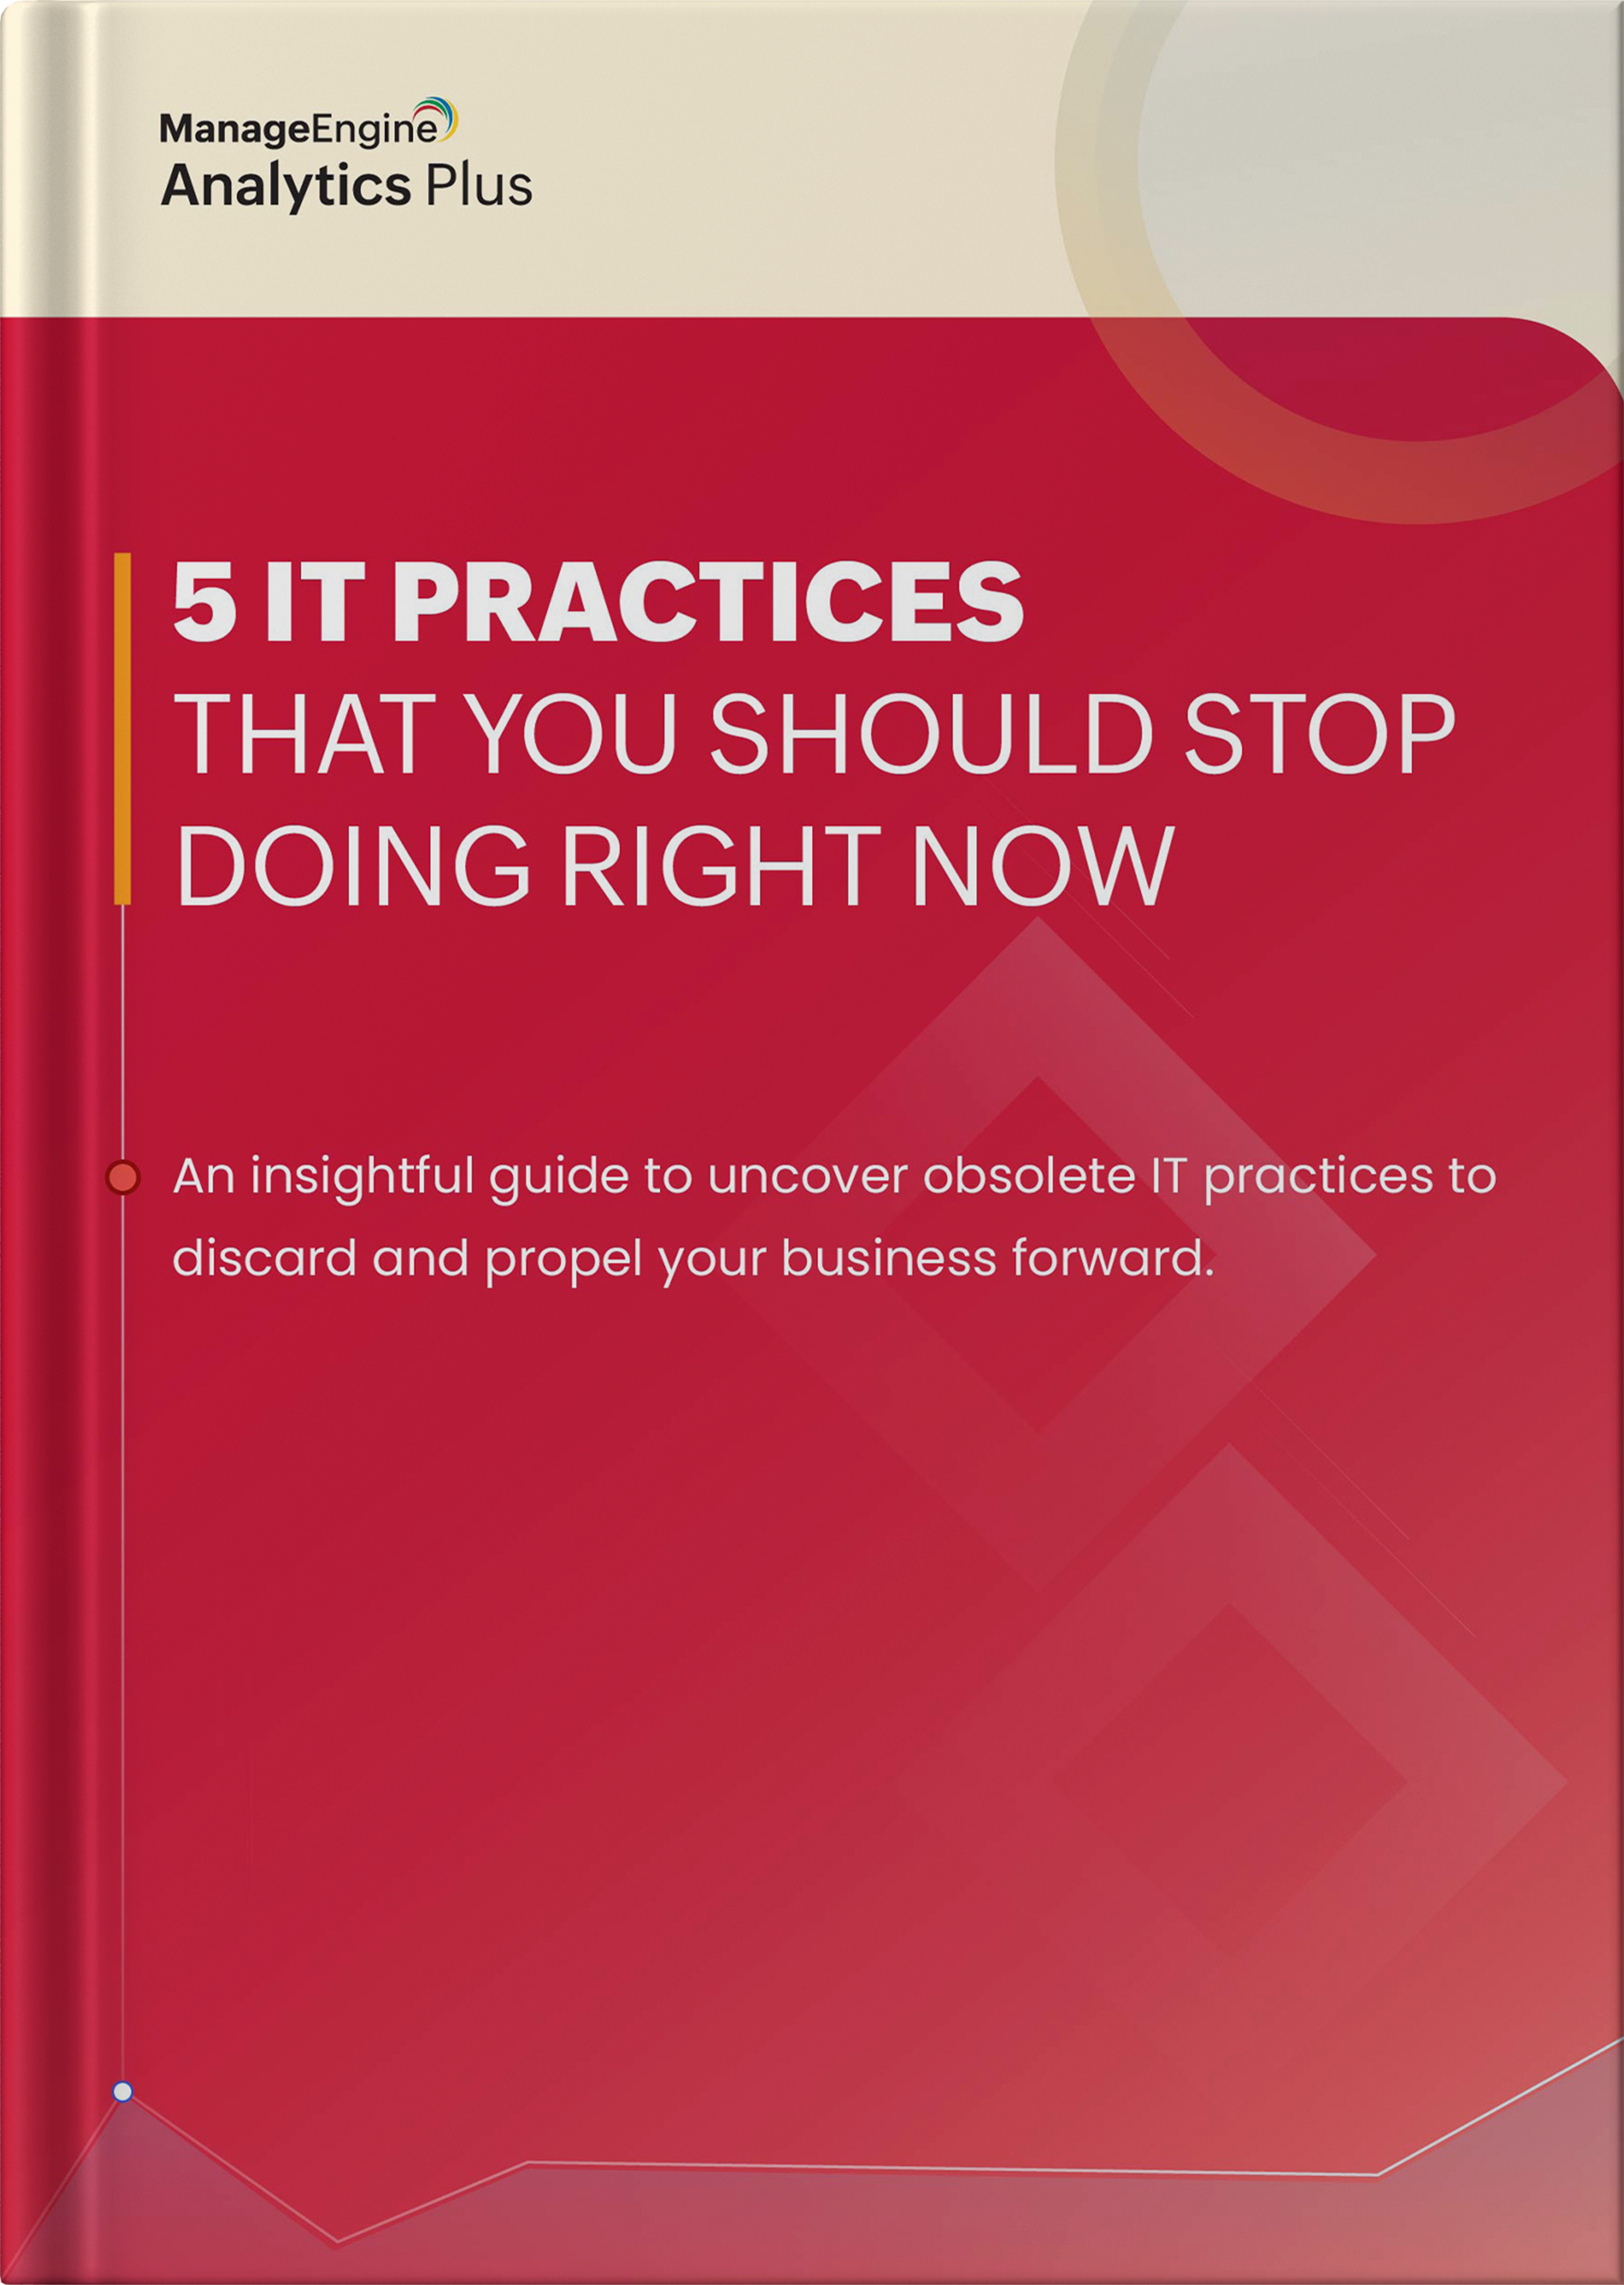 5 IT practices that you should stop right now 